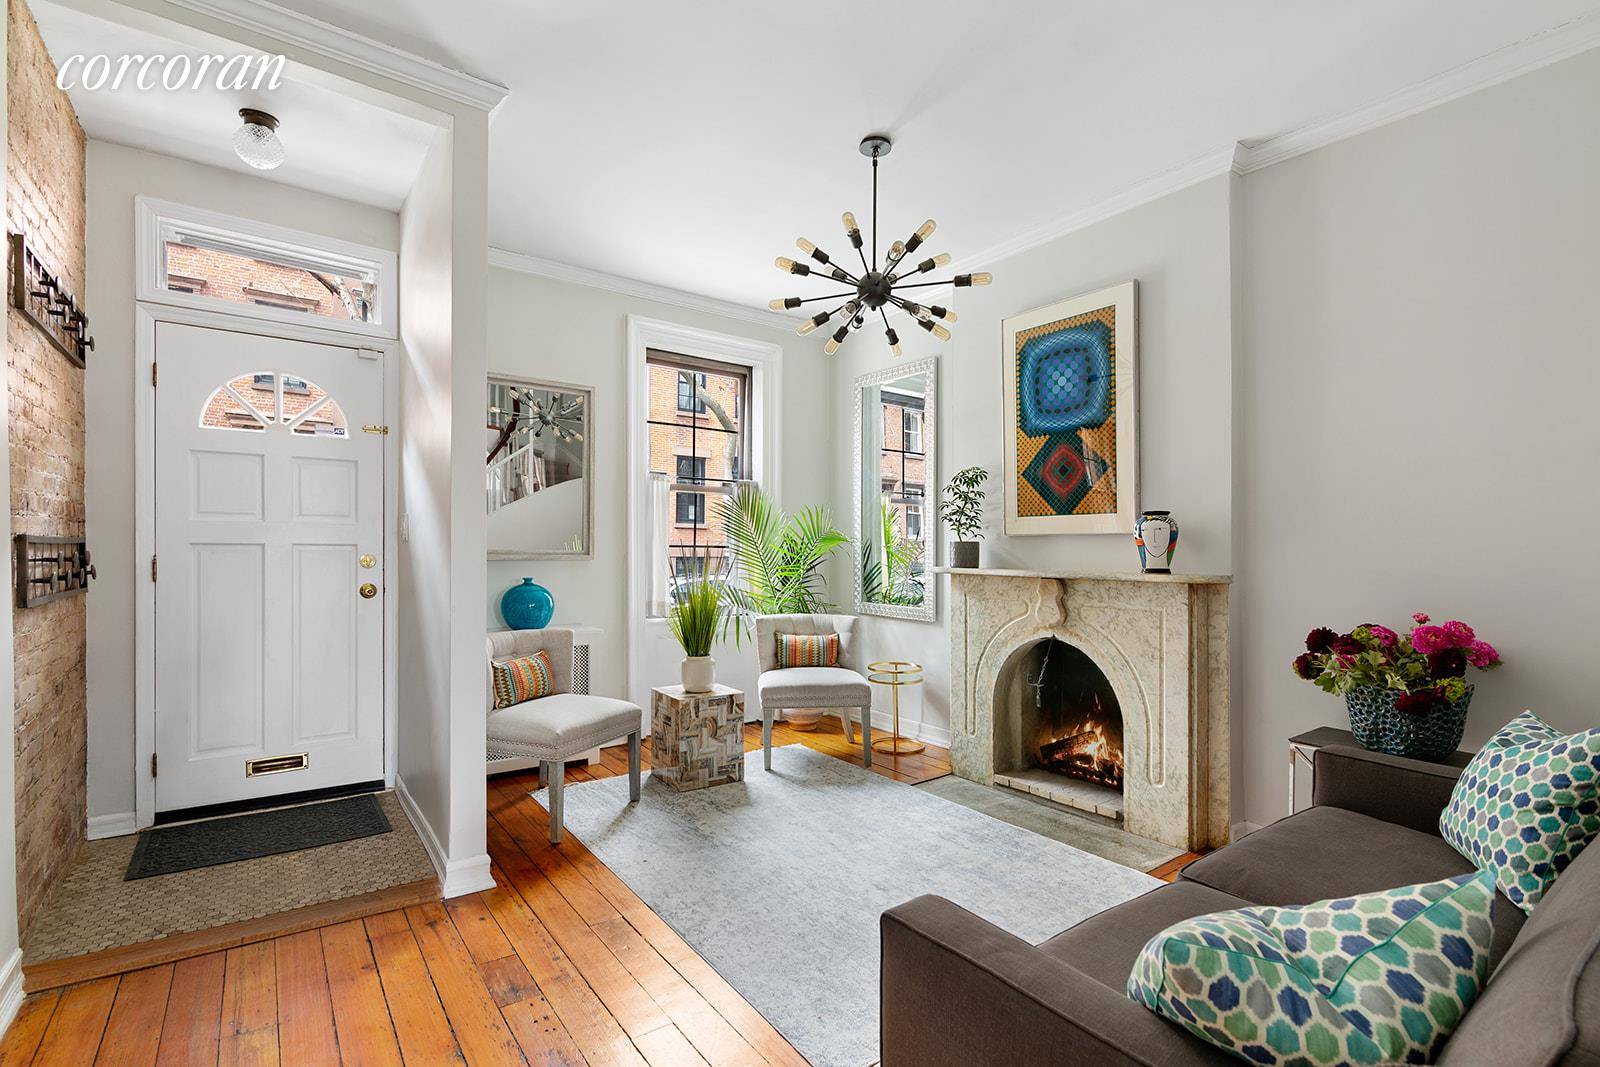 161 Hoyt St, in the Heart of Boerum Hill, is the perfect 4 bedroom triplex over a garden rental and spans approximately 2, 132 SF.